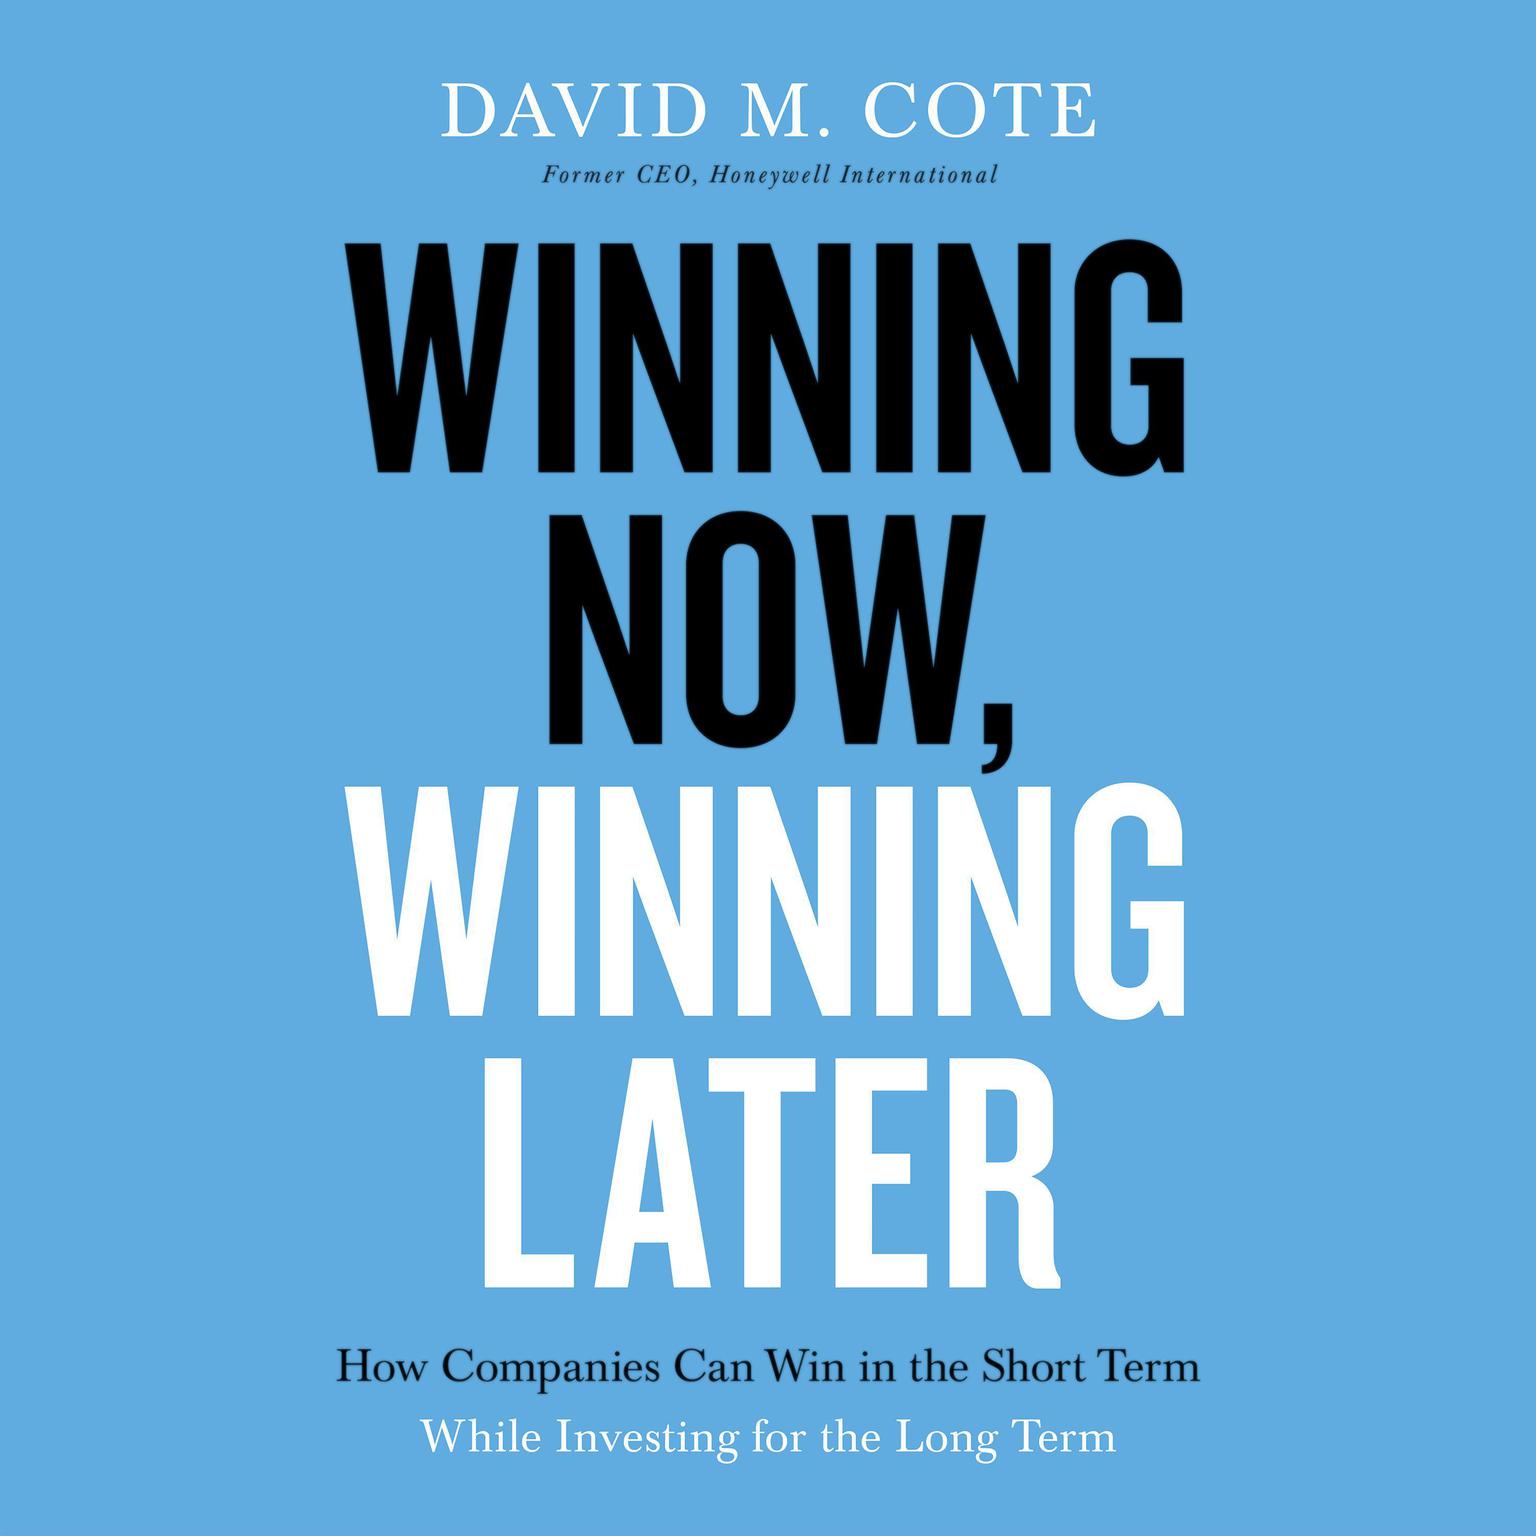 Winning Now, Winning Later: How Companies Can Succeed in the Short Term While Investing for the Long Term Audiobook, by David M. Cote